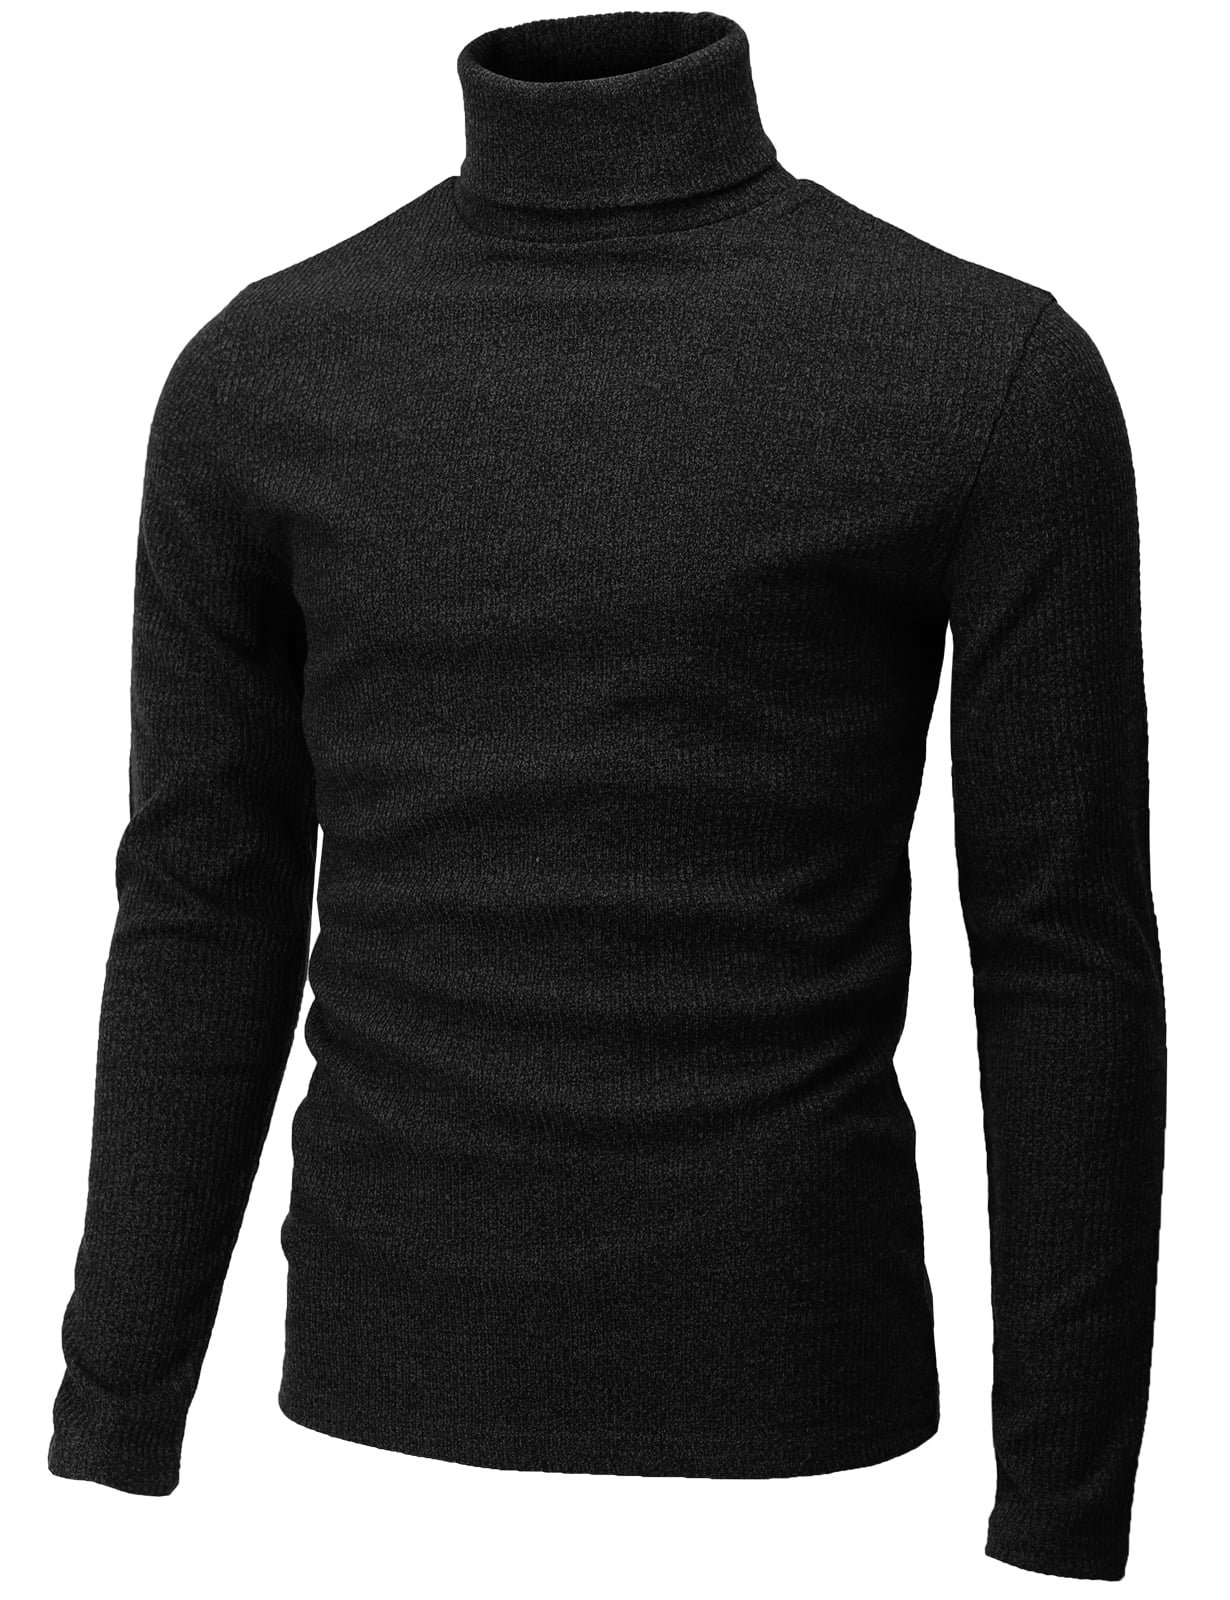 H2H Mens Slim Fit Turtleneck Pullover Rib Fabric Sweaters Basic Tops ...